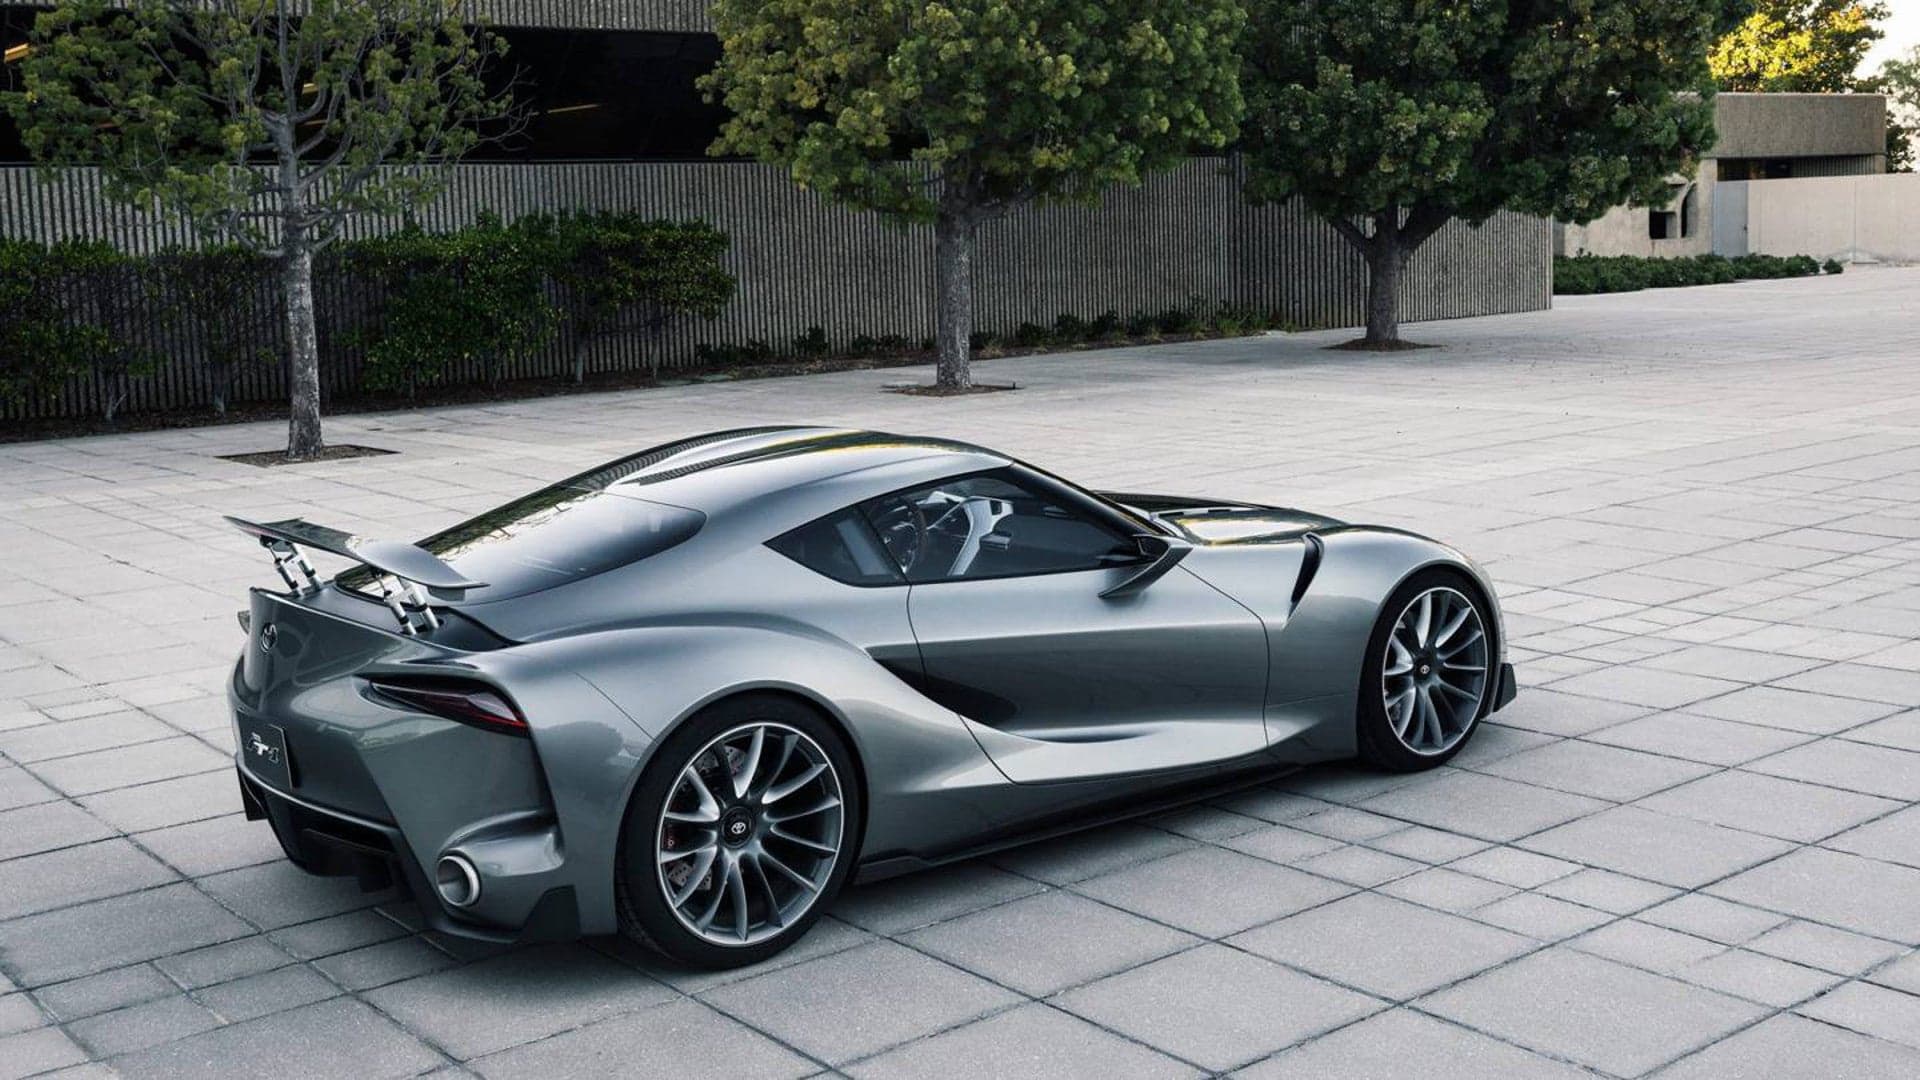 The New Supra Will Be Sold Under Toyota’s Gazoo Racing Brand